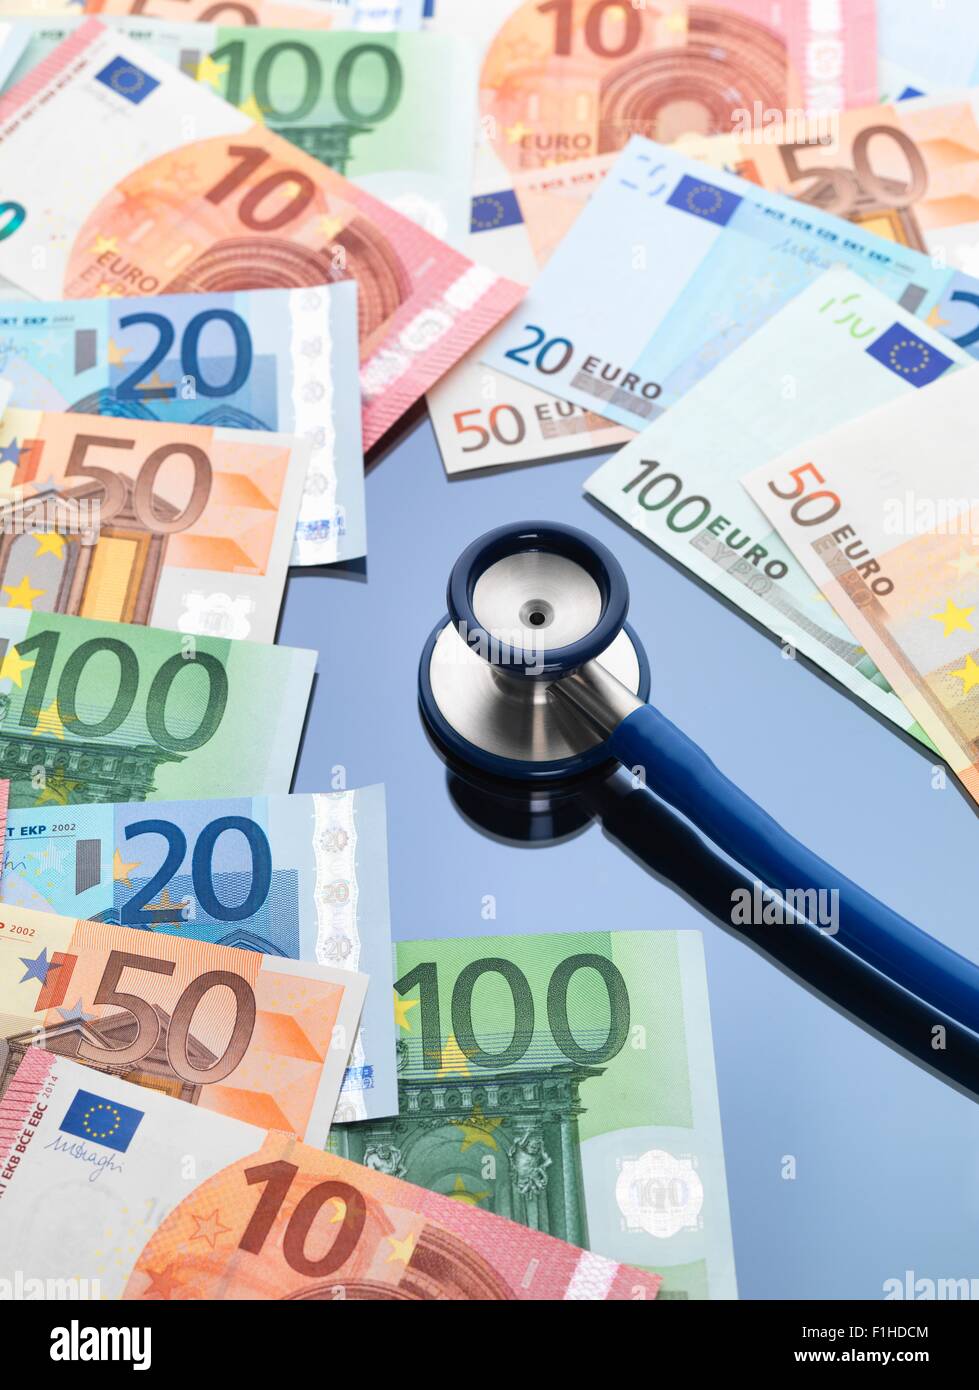 Stethoscope with euro currency notes Stock Photo